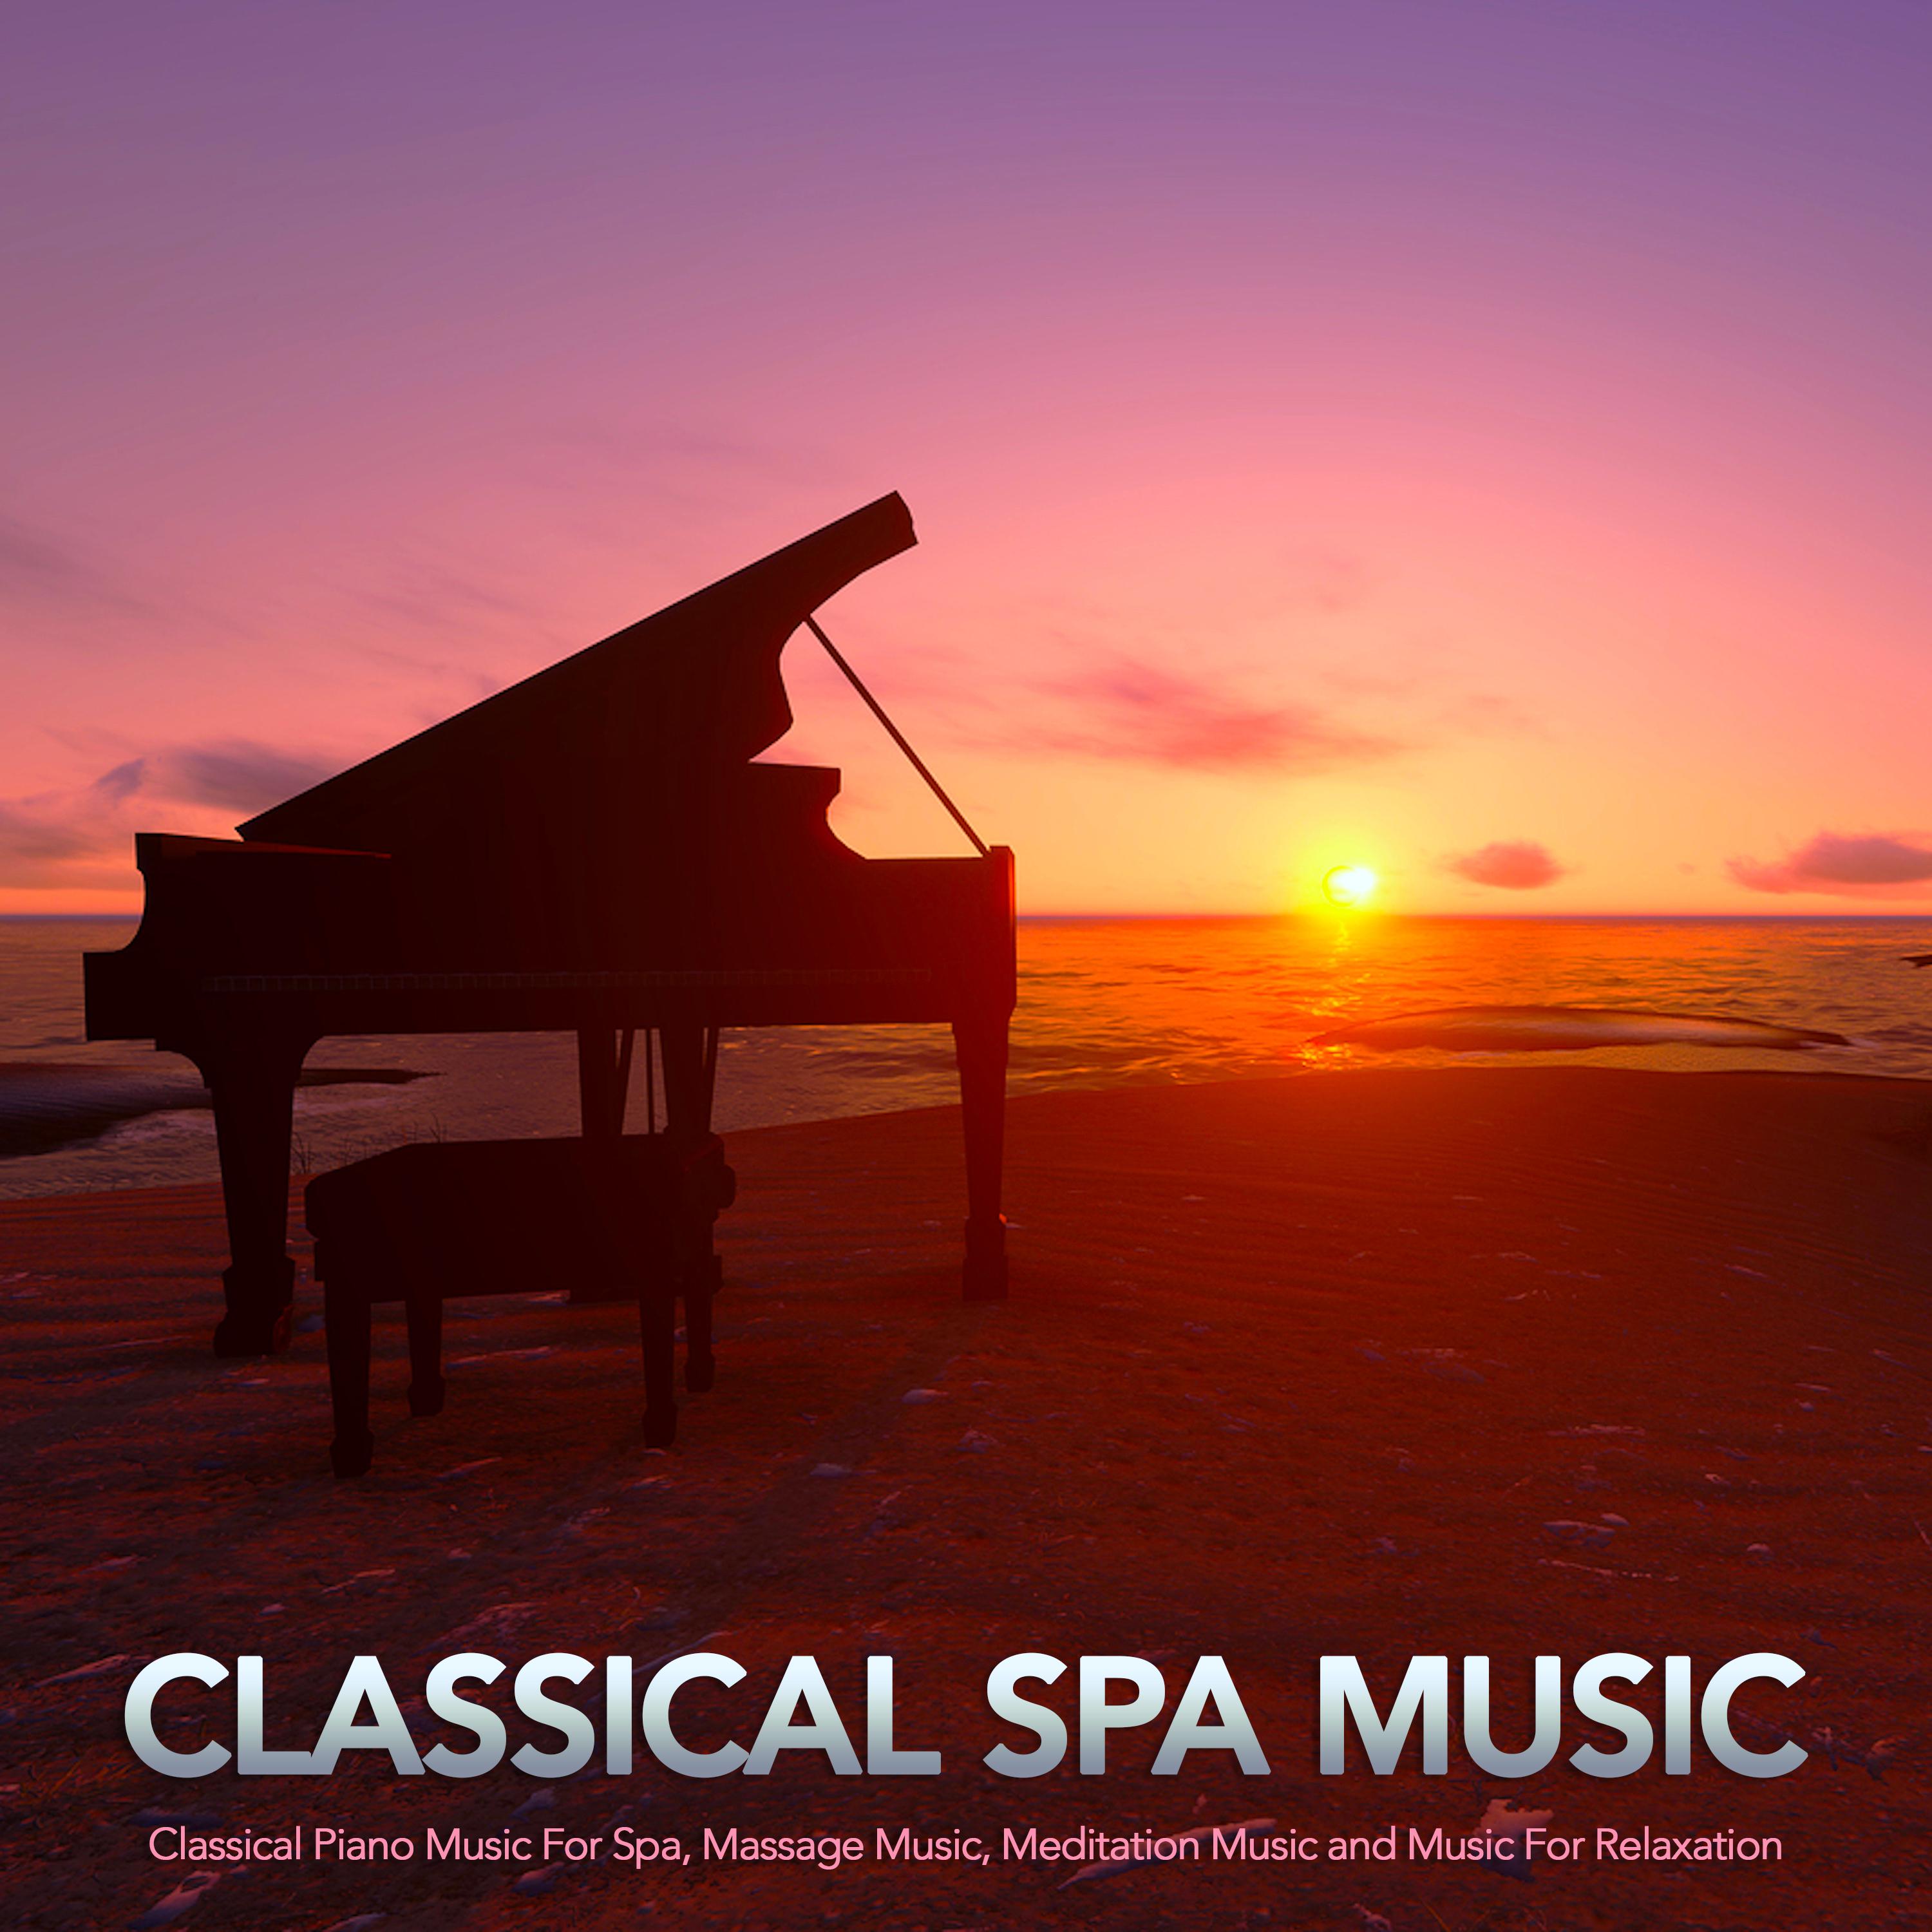 Song Without Words - Mendelssohn - Classical Piano Music - Spa Music